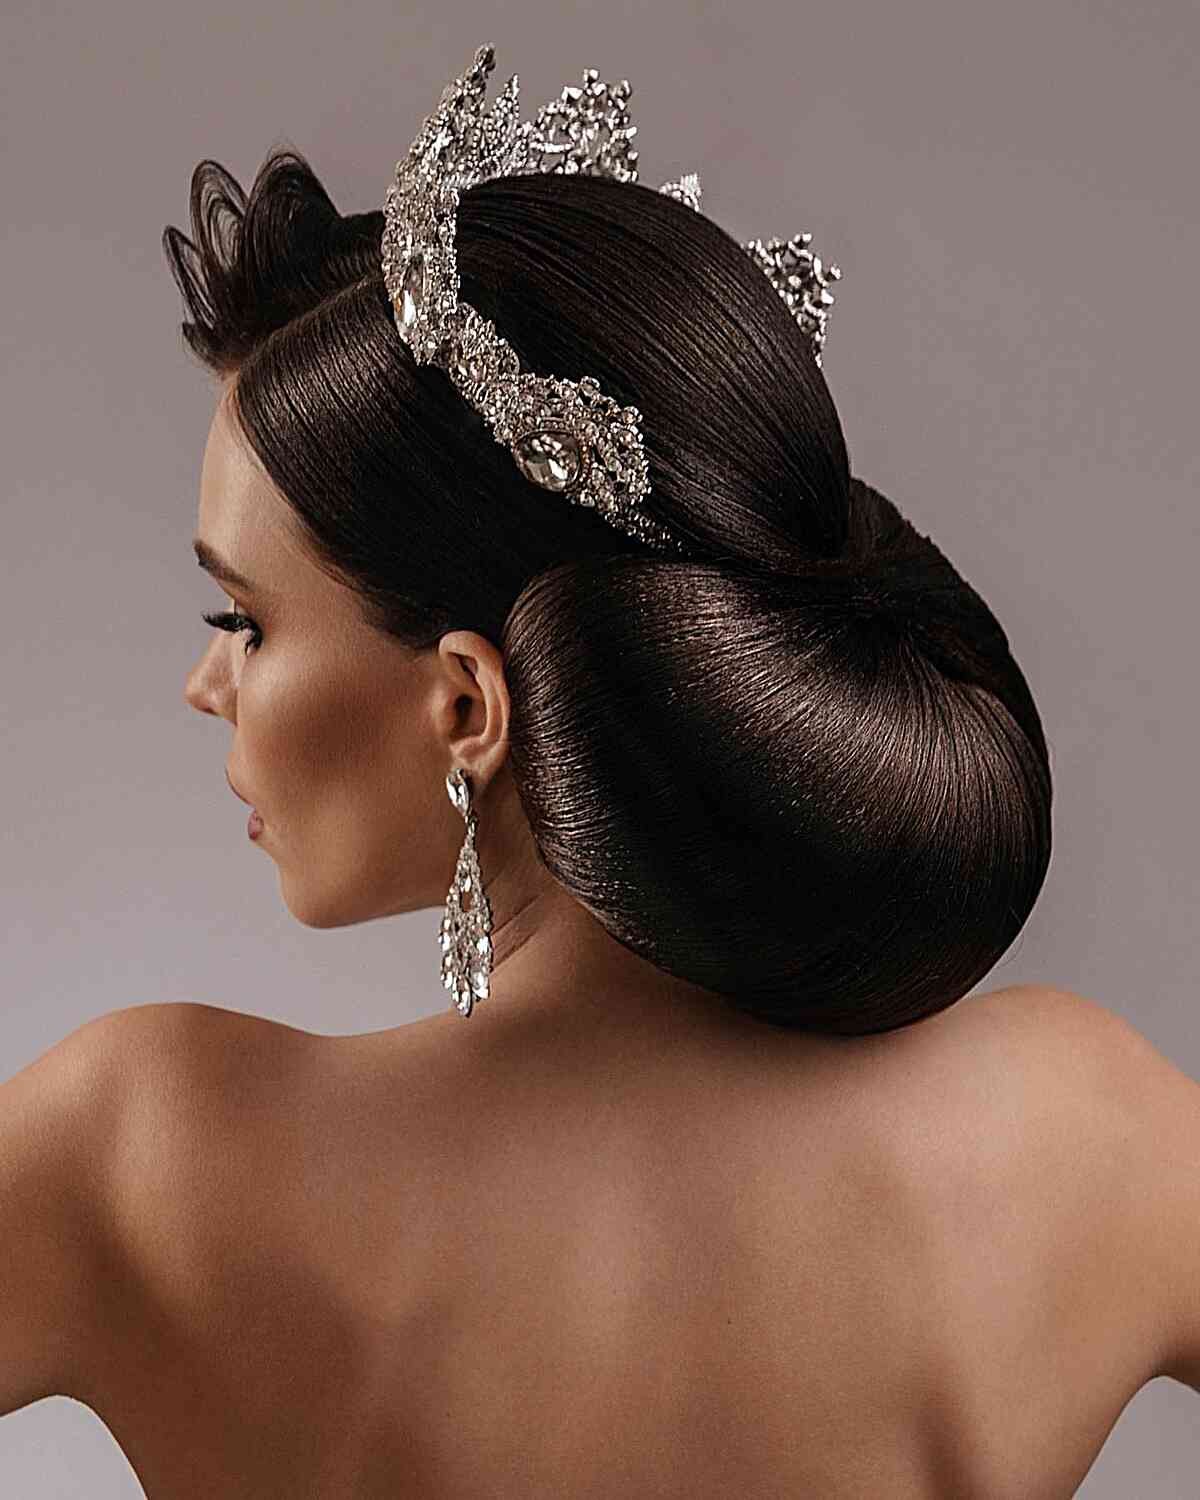 Royalty-Inspired Princess Updo and crown accessories for women with long dark hair